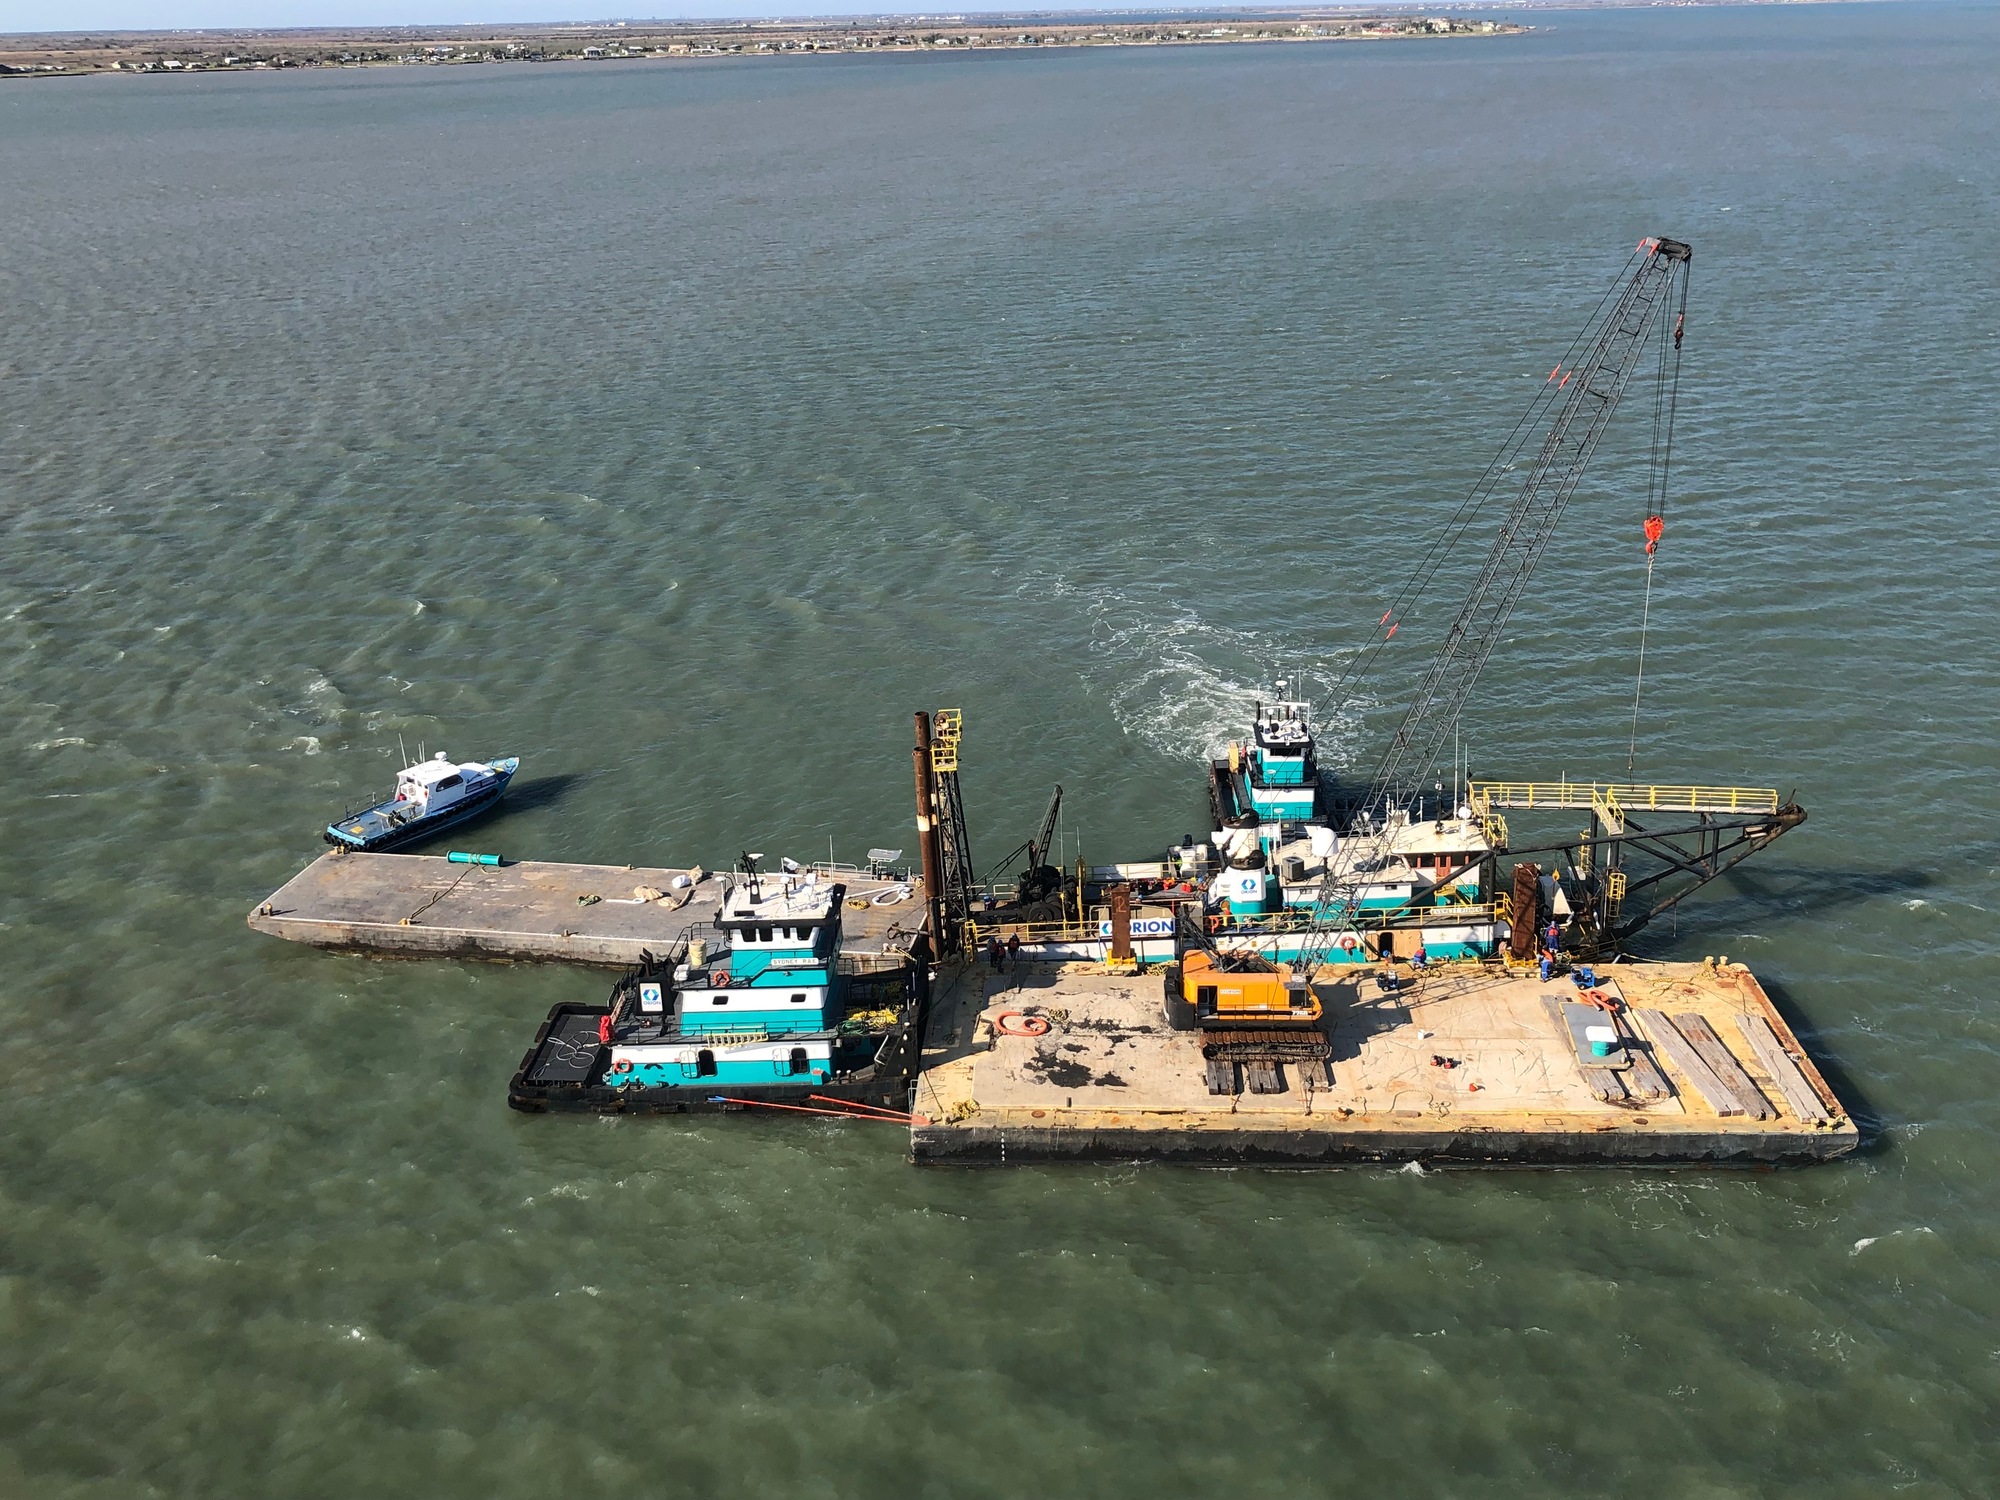 Coast Guard responding to grounded barge in Matagorda Ship Channel near Port Lavaca, Texas